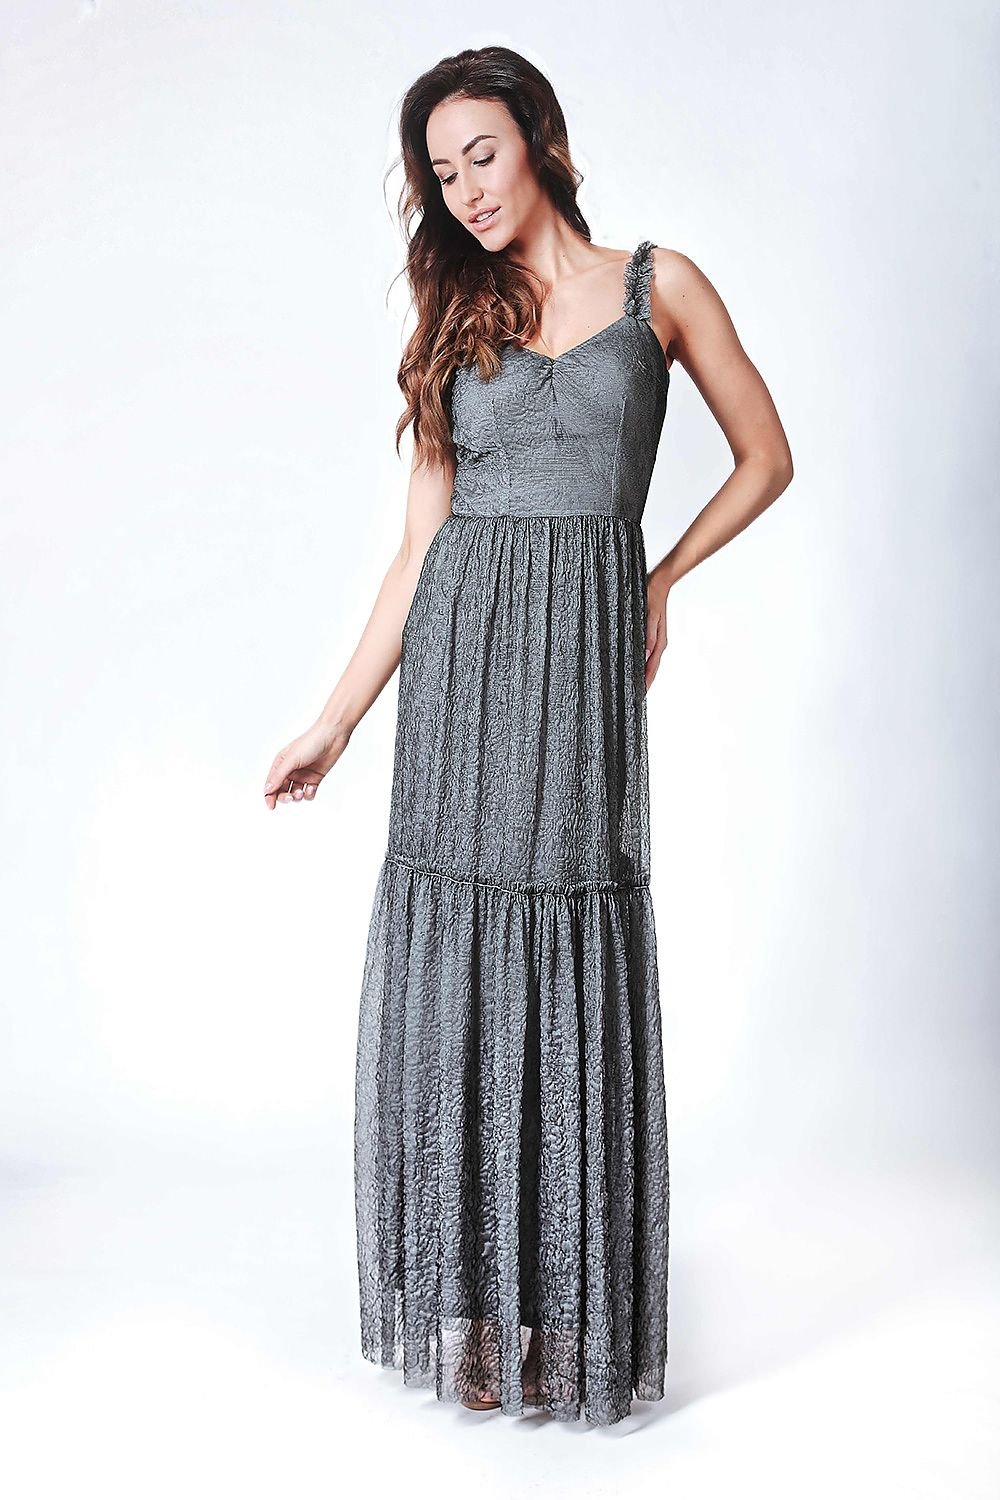 Double-layered grey maxi dress with original straps